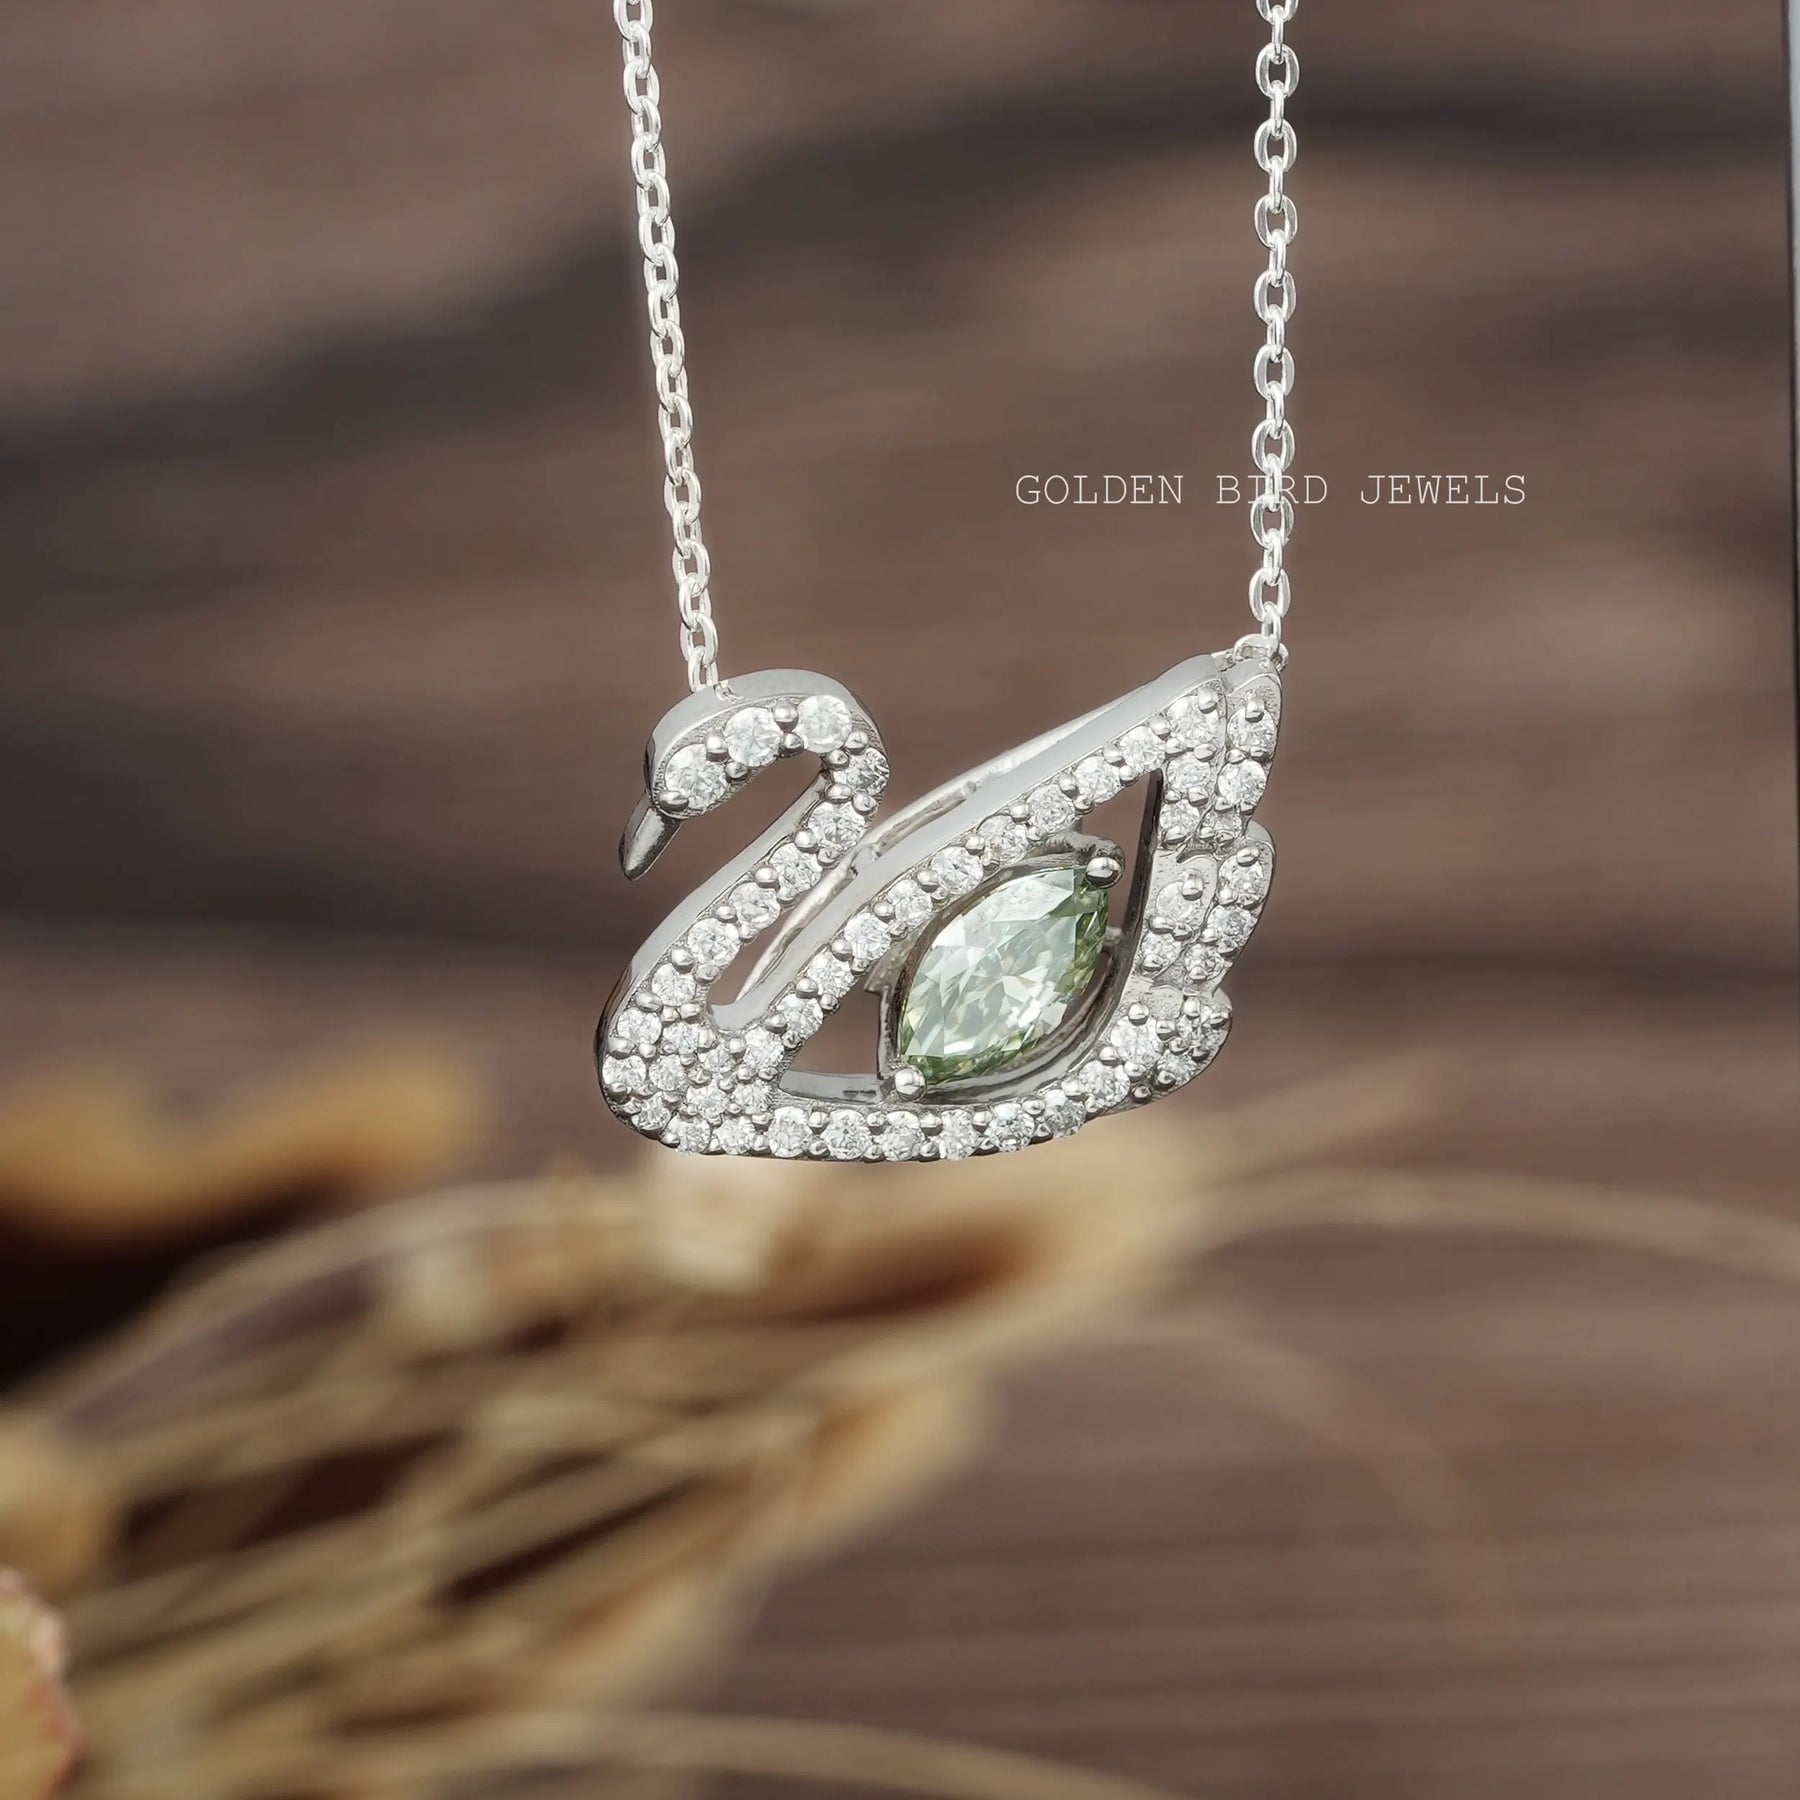 [This duck pendant crafted with round cut side stones]-[Golden Bird Jewels]